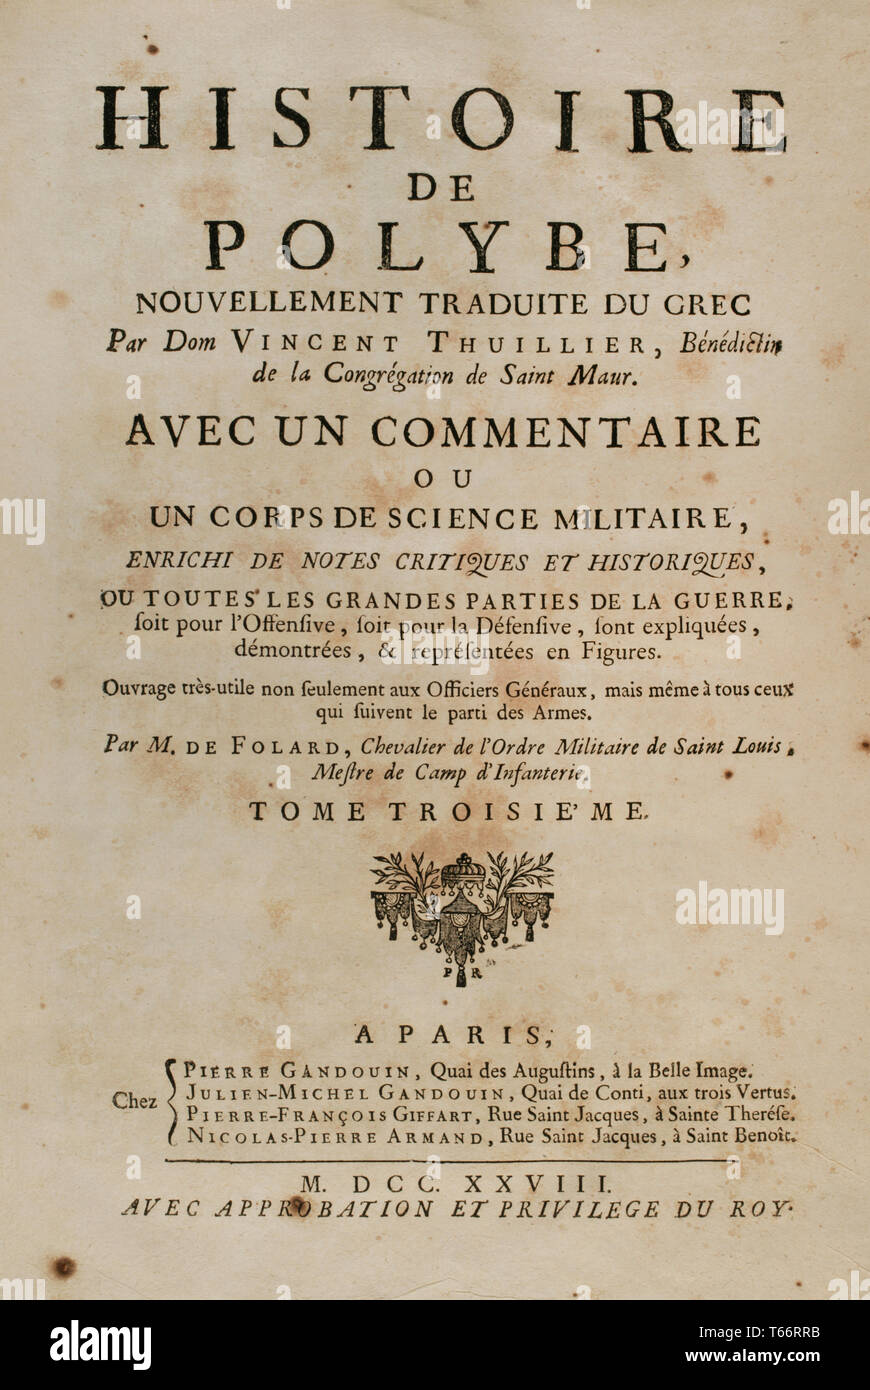 History by Polybius. Volume III. French edition translated from Greek by Dom Vincent Thuillier. Comments of Military Science enriched with critical and historical notes by M. De Folard. Paris, chez Pierre Gandouin, Julien-Michel Gandouin, Pierre-Francois Giffart and Nicolas-Pierre Armand, 1728. Frontispiece. Stock Photo